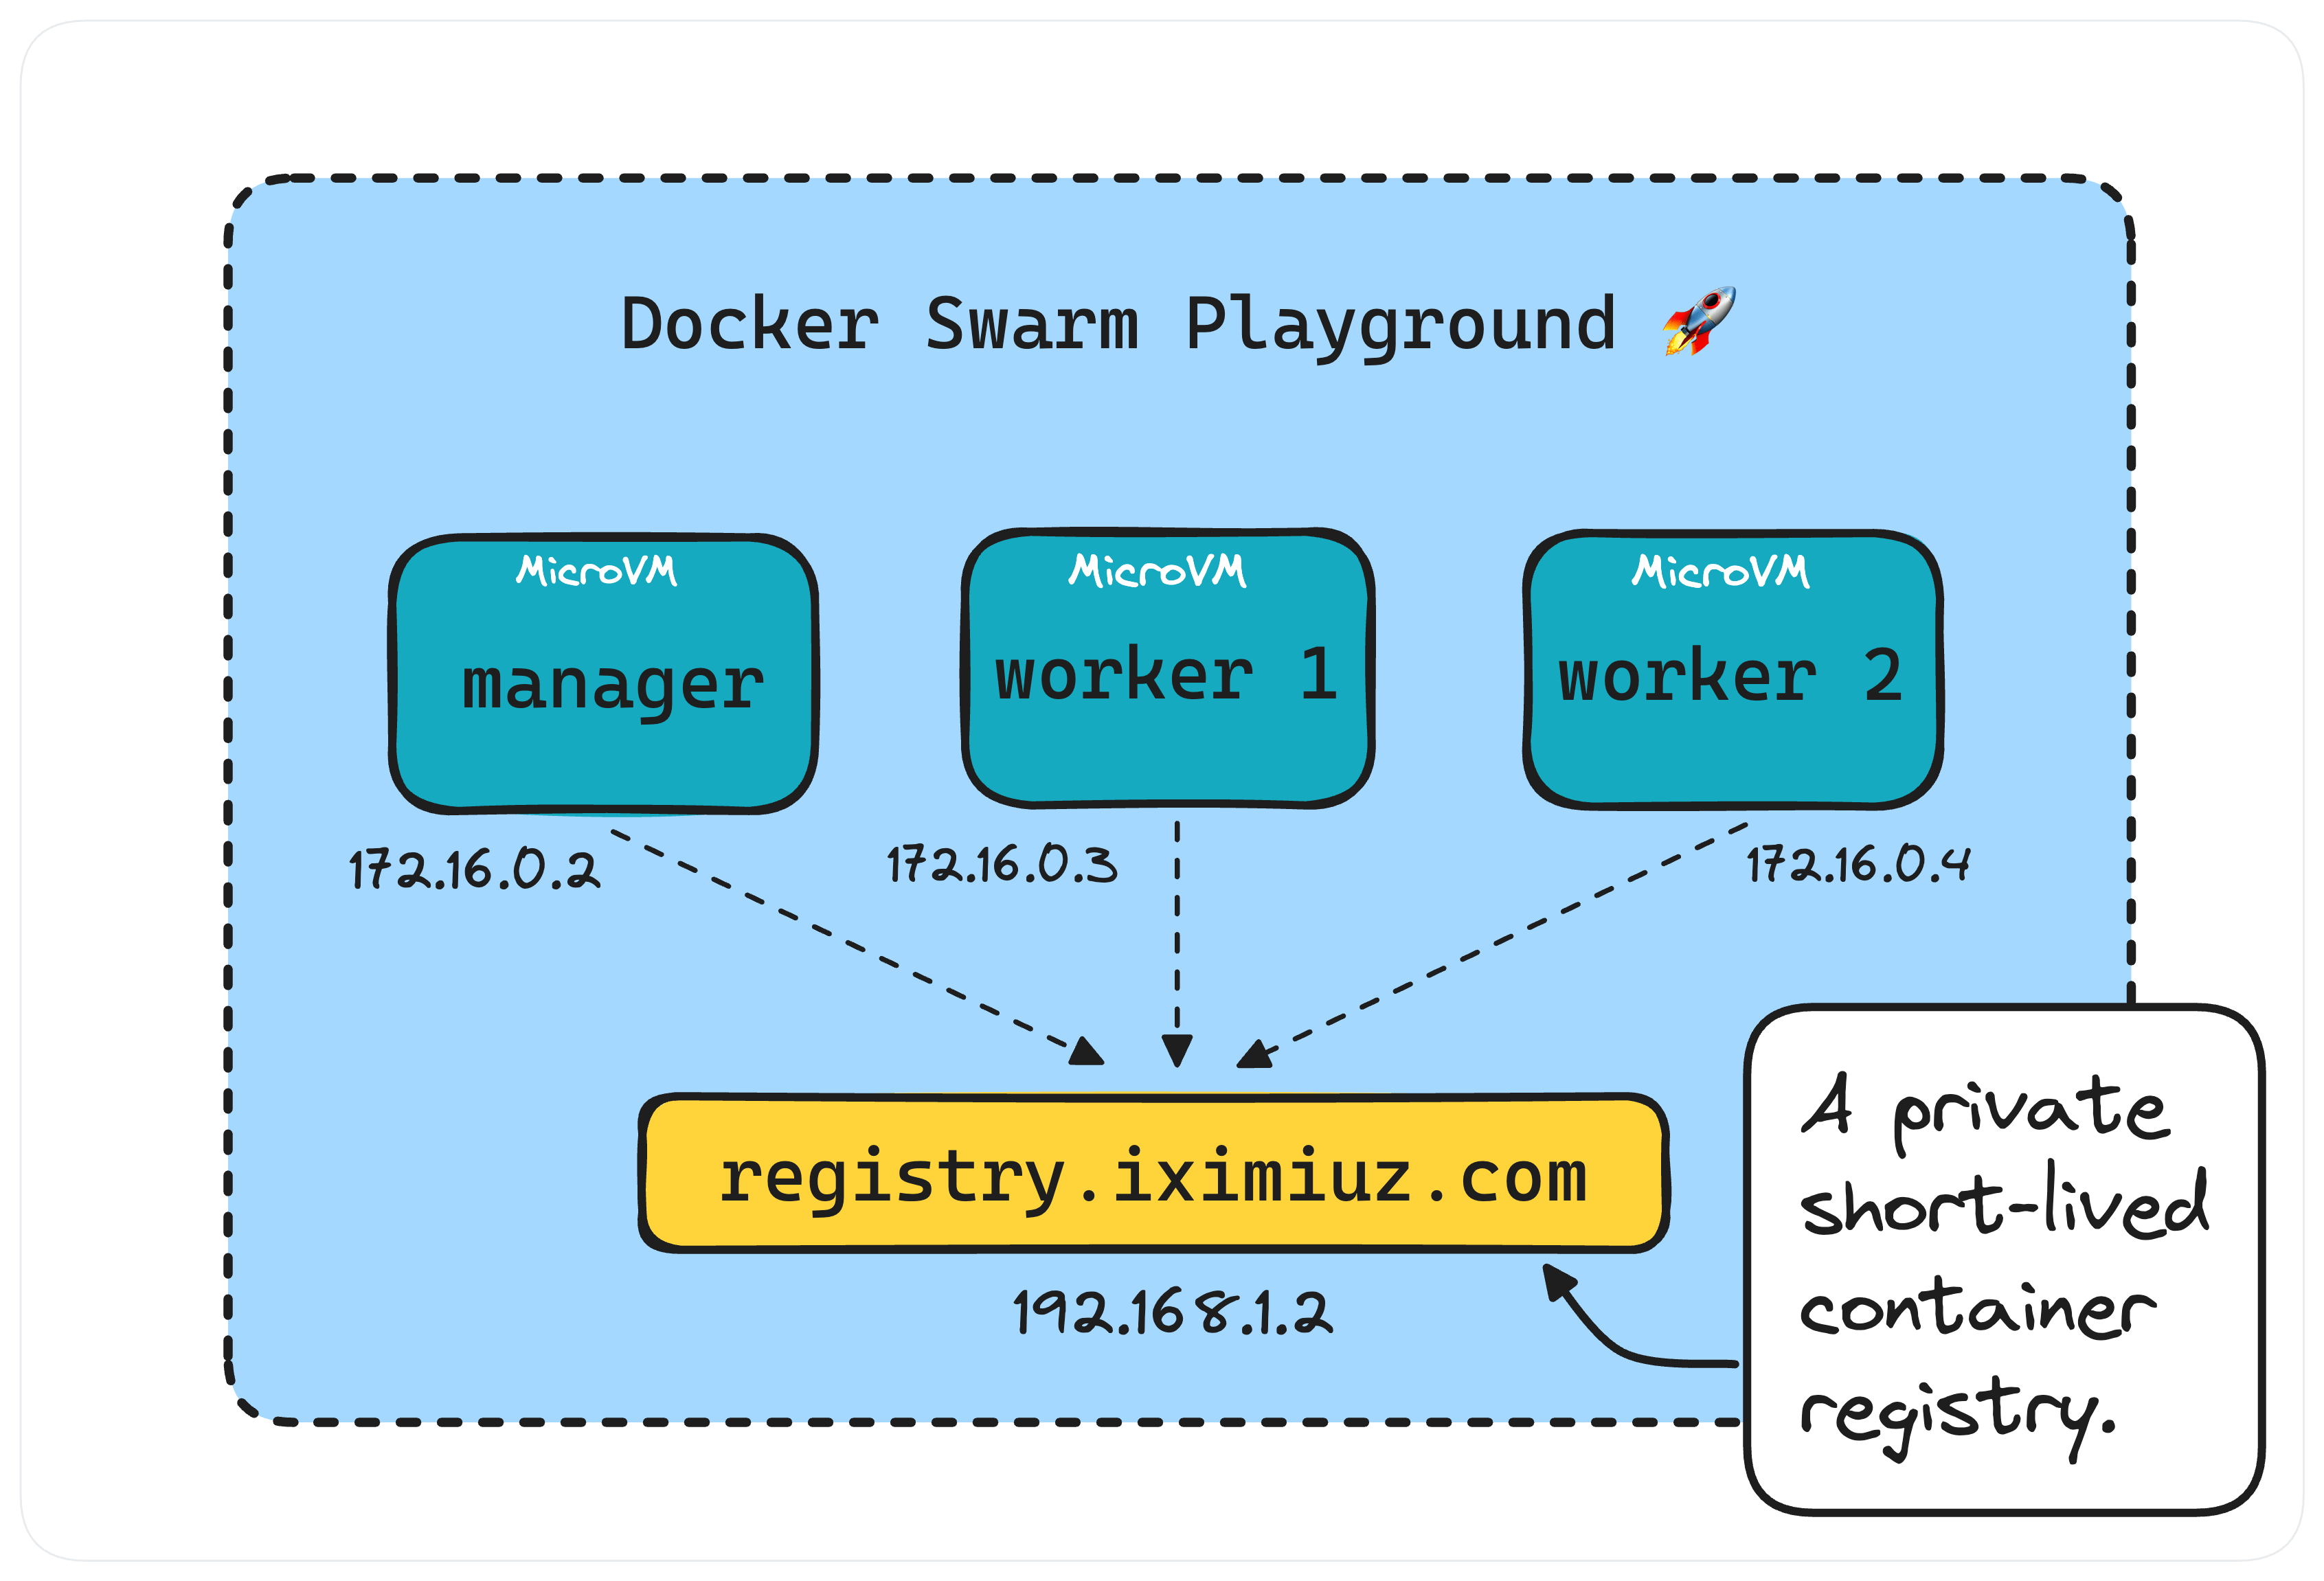 Docker Swarm playground: A three-node swarm accompanied by an ephemeral registry for ease of experimentation. Batteries included!